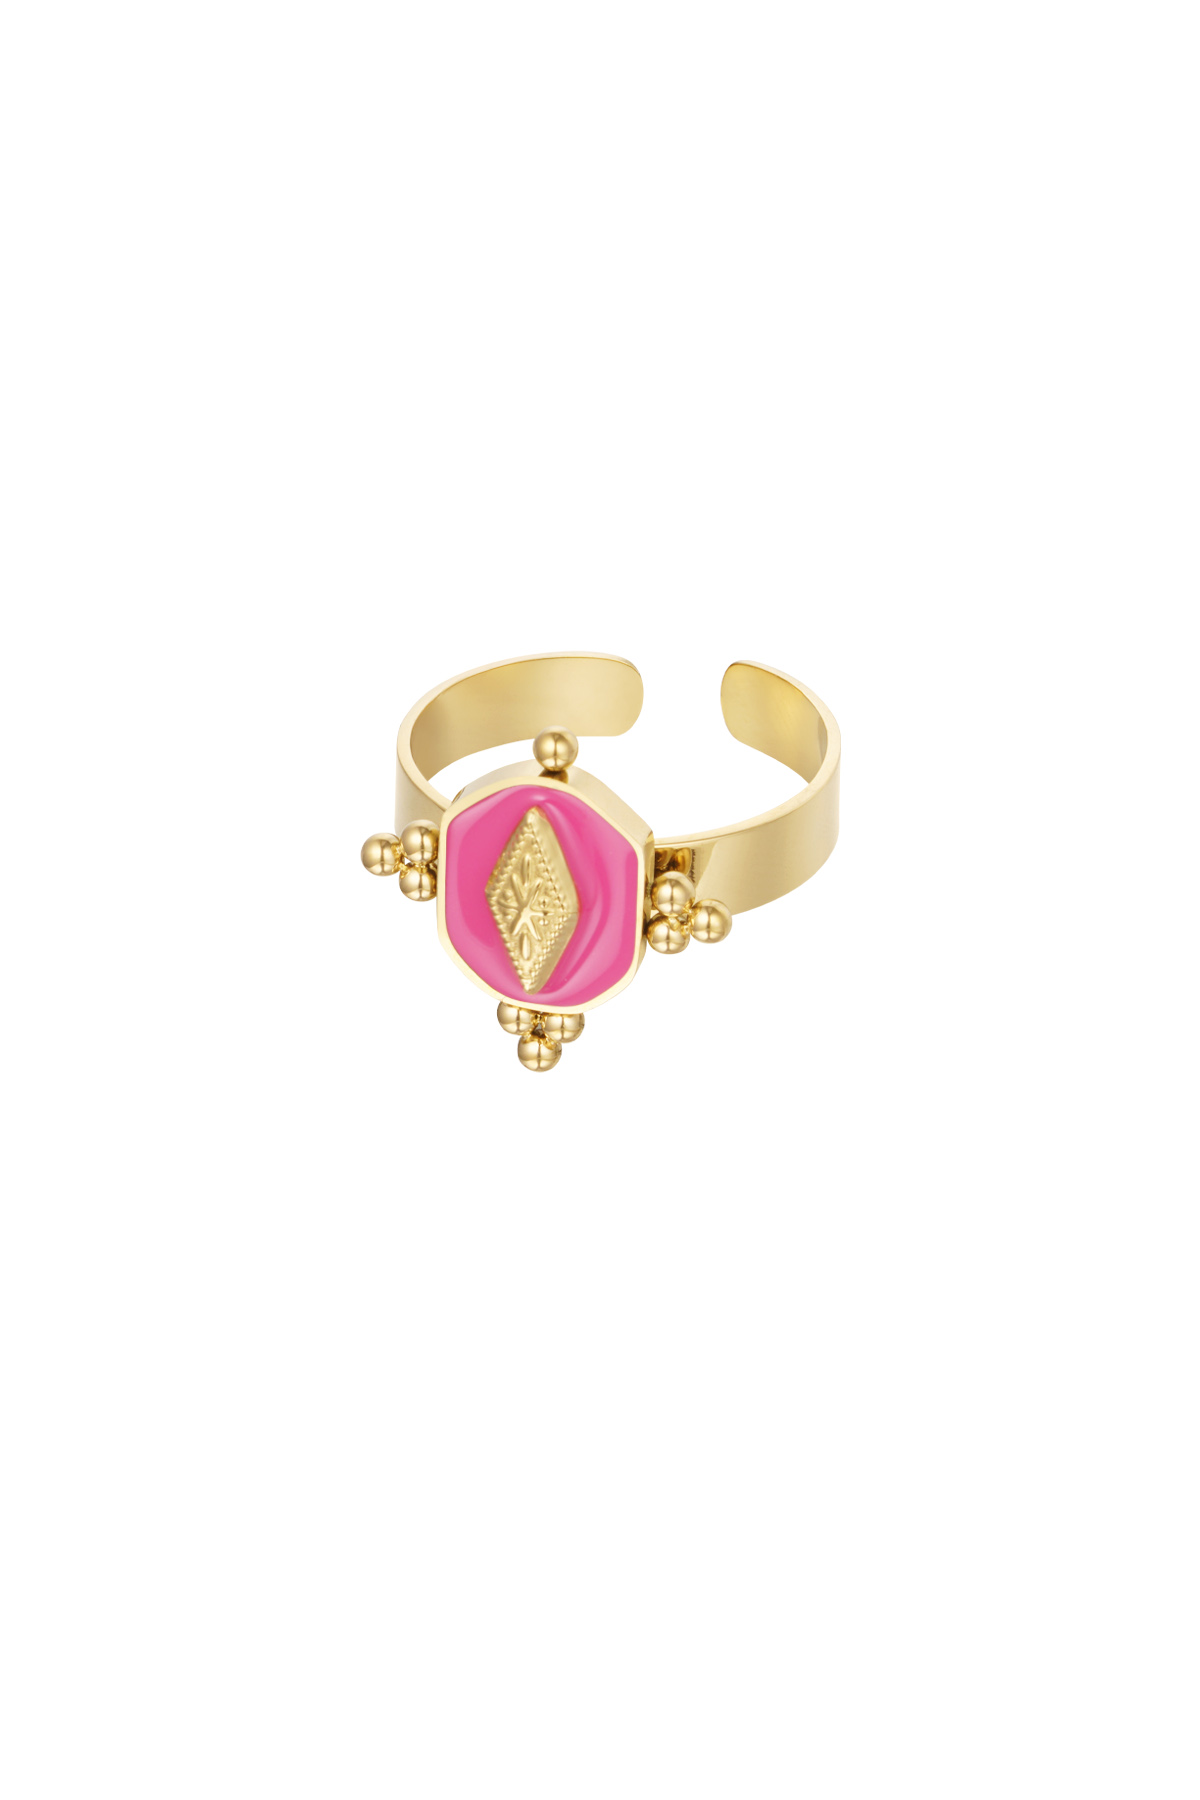 Ring vintage look colored - gold/fuchsia